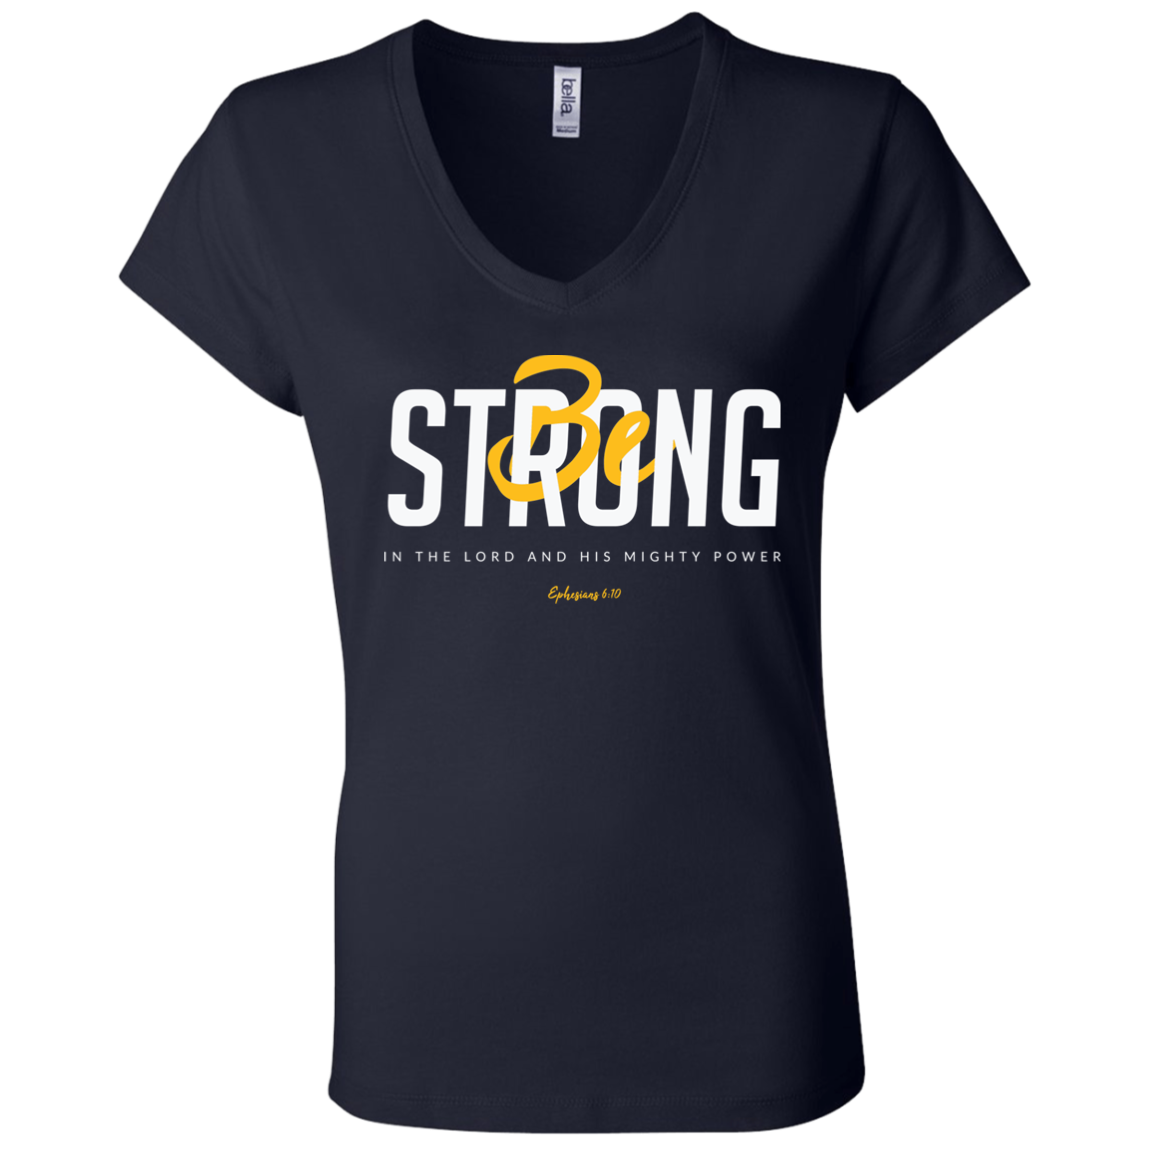 Be Strong | Ladies’ Performance V-Neck